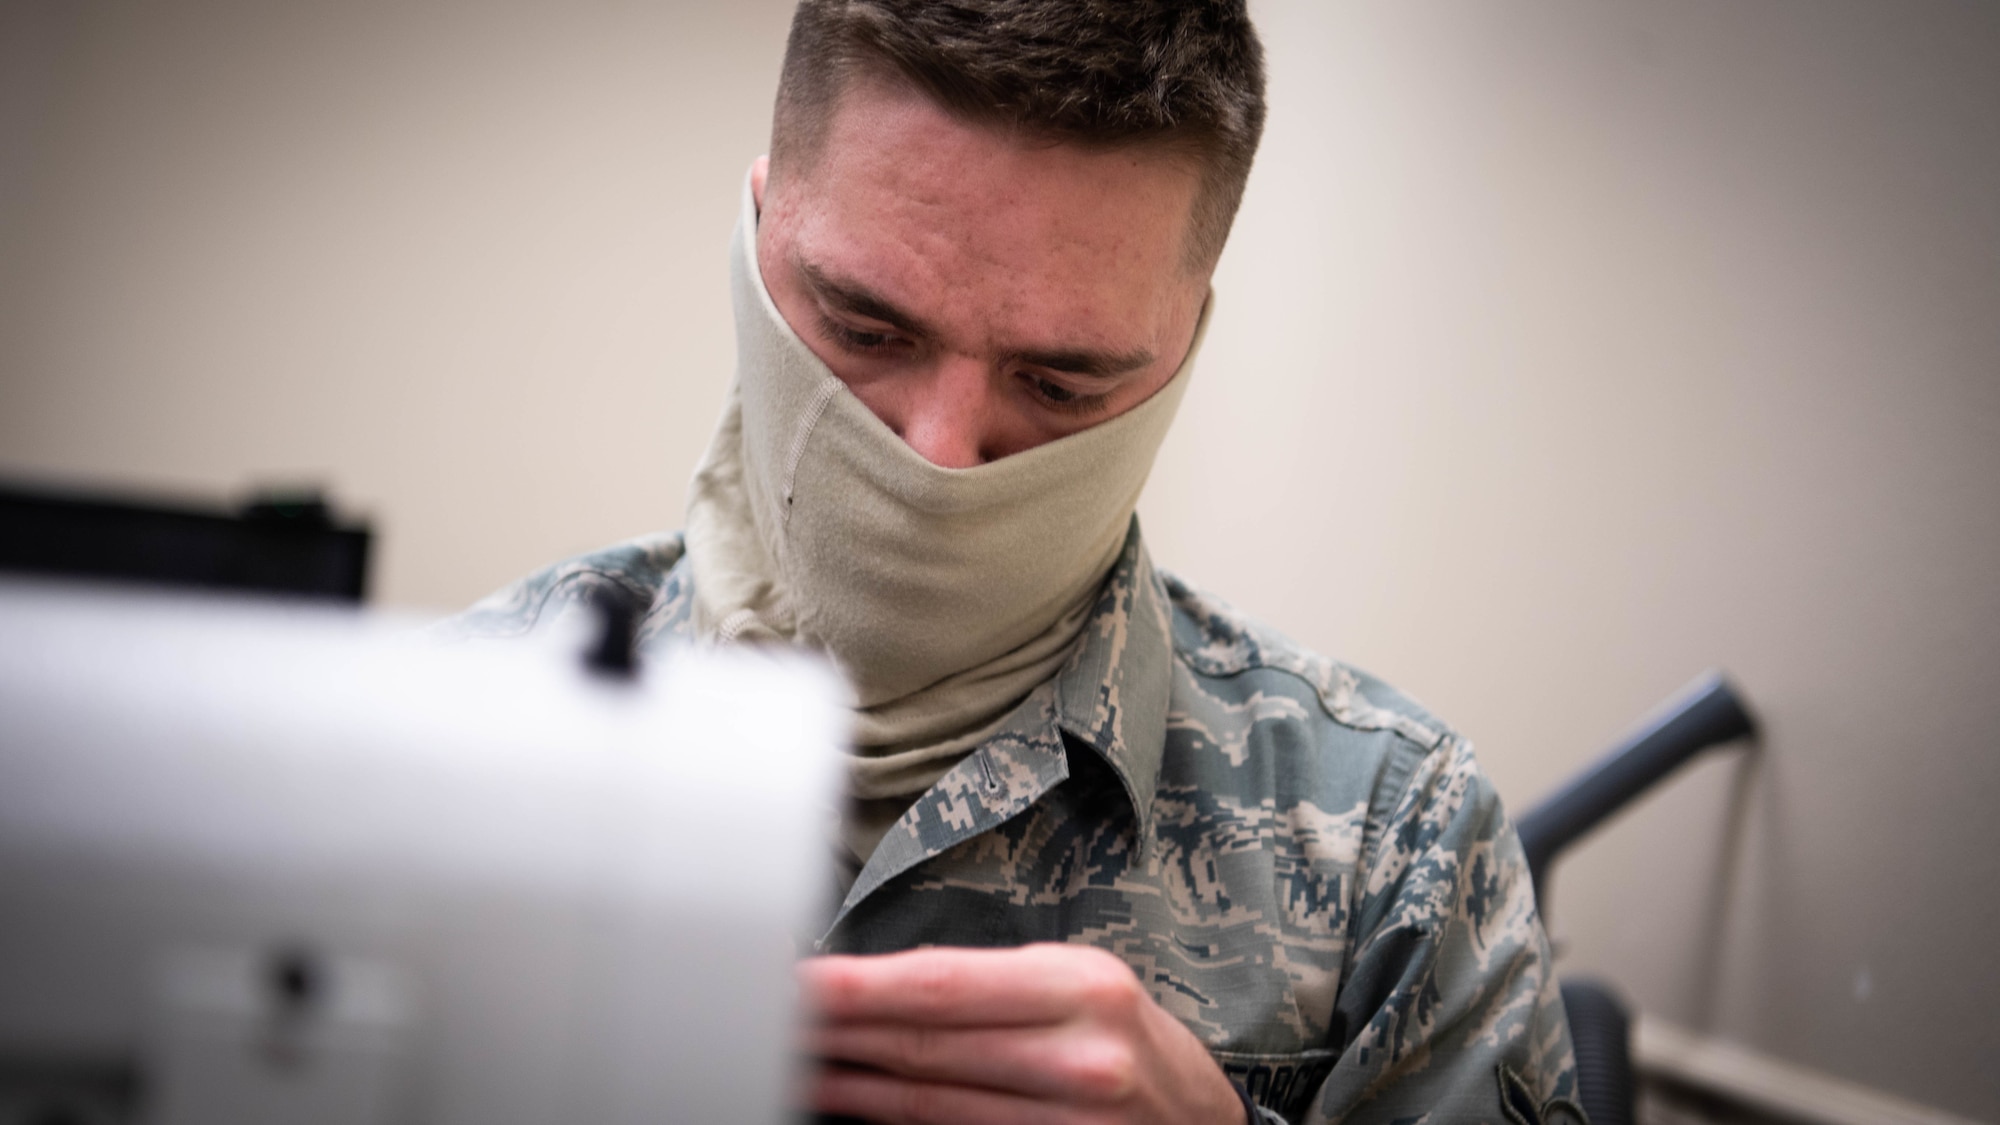 Airman Alexander D. Neurohr, 2nd Operational Support Squadron aircrew flight equipment journeyman, sews a mask at Barksdale Air Force Base, La., April 16, 2020. All Airmen of the 2nd OSS AFE shop learned to sew as part of their technical training to repair aircrew equipment including parachutes, flight suits and other various equipment. (U.S. Air Force photo by Airman 1st Class Jacob B. Wrightsman)